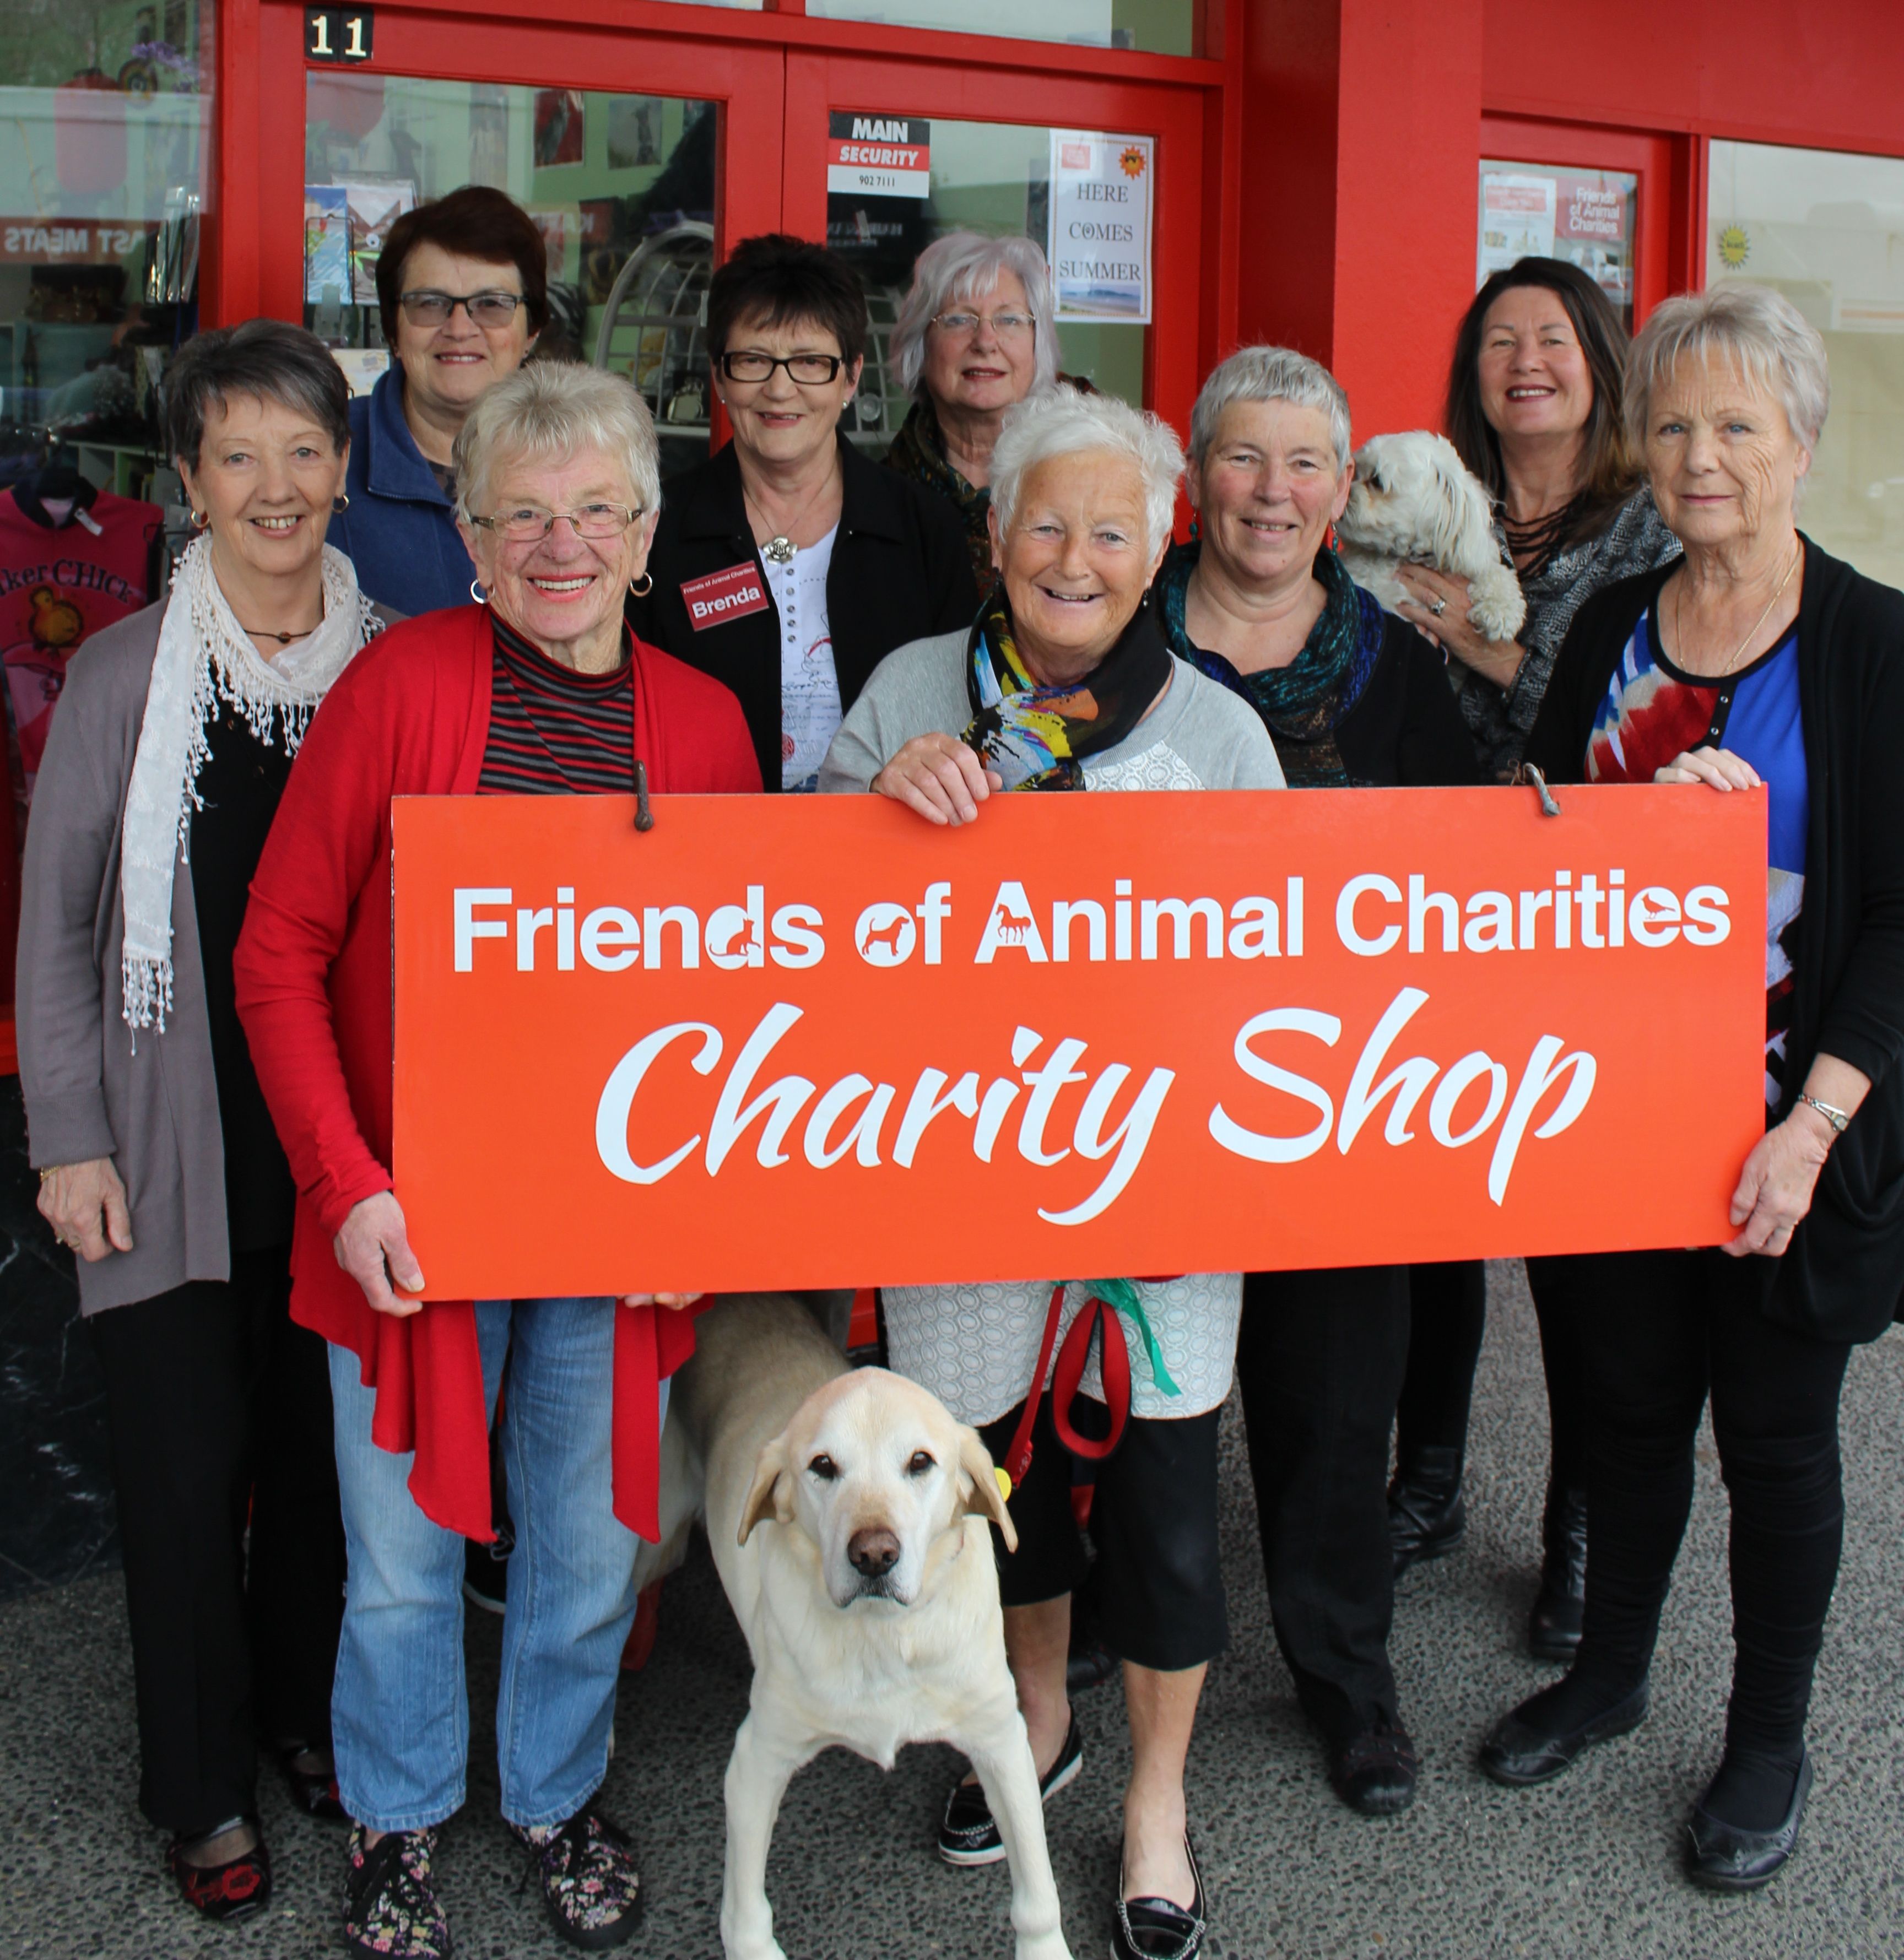 Charity's a friend to all animals - NZ Herald